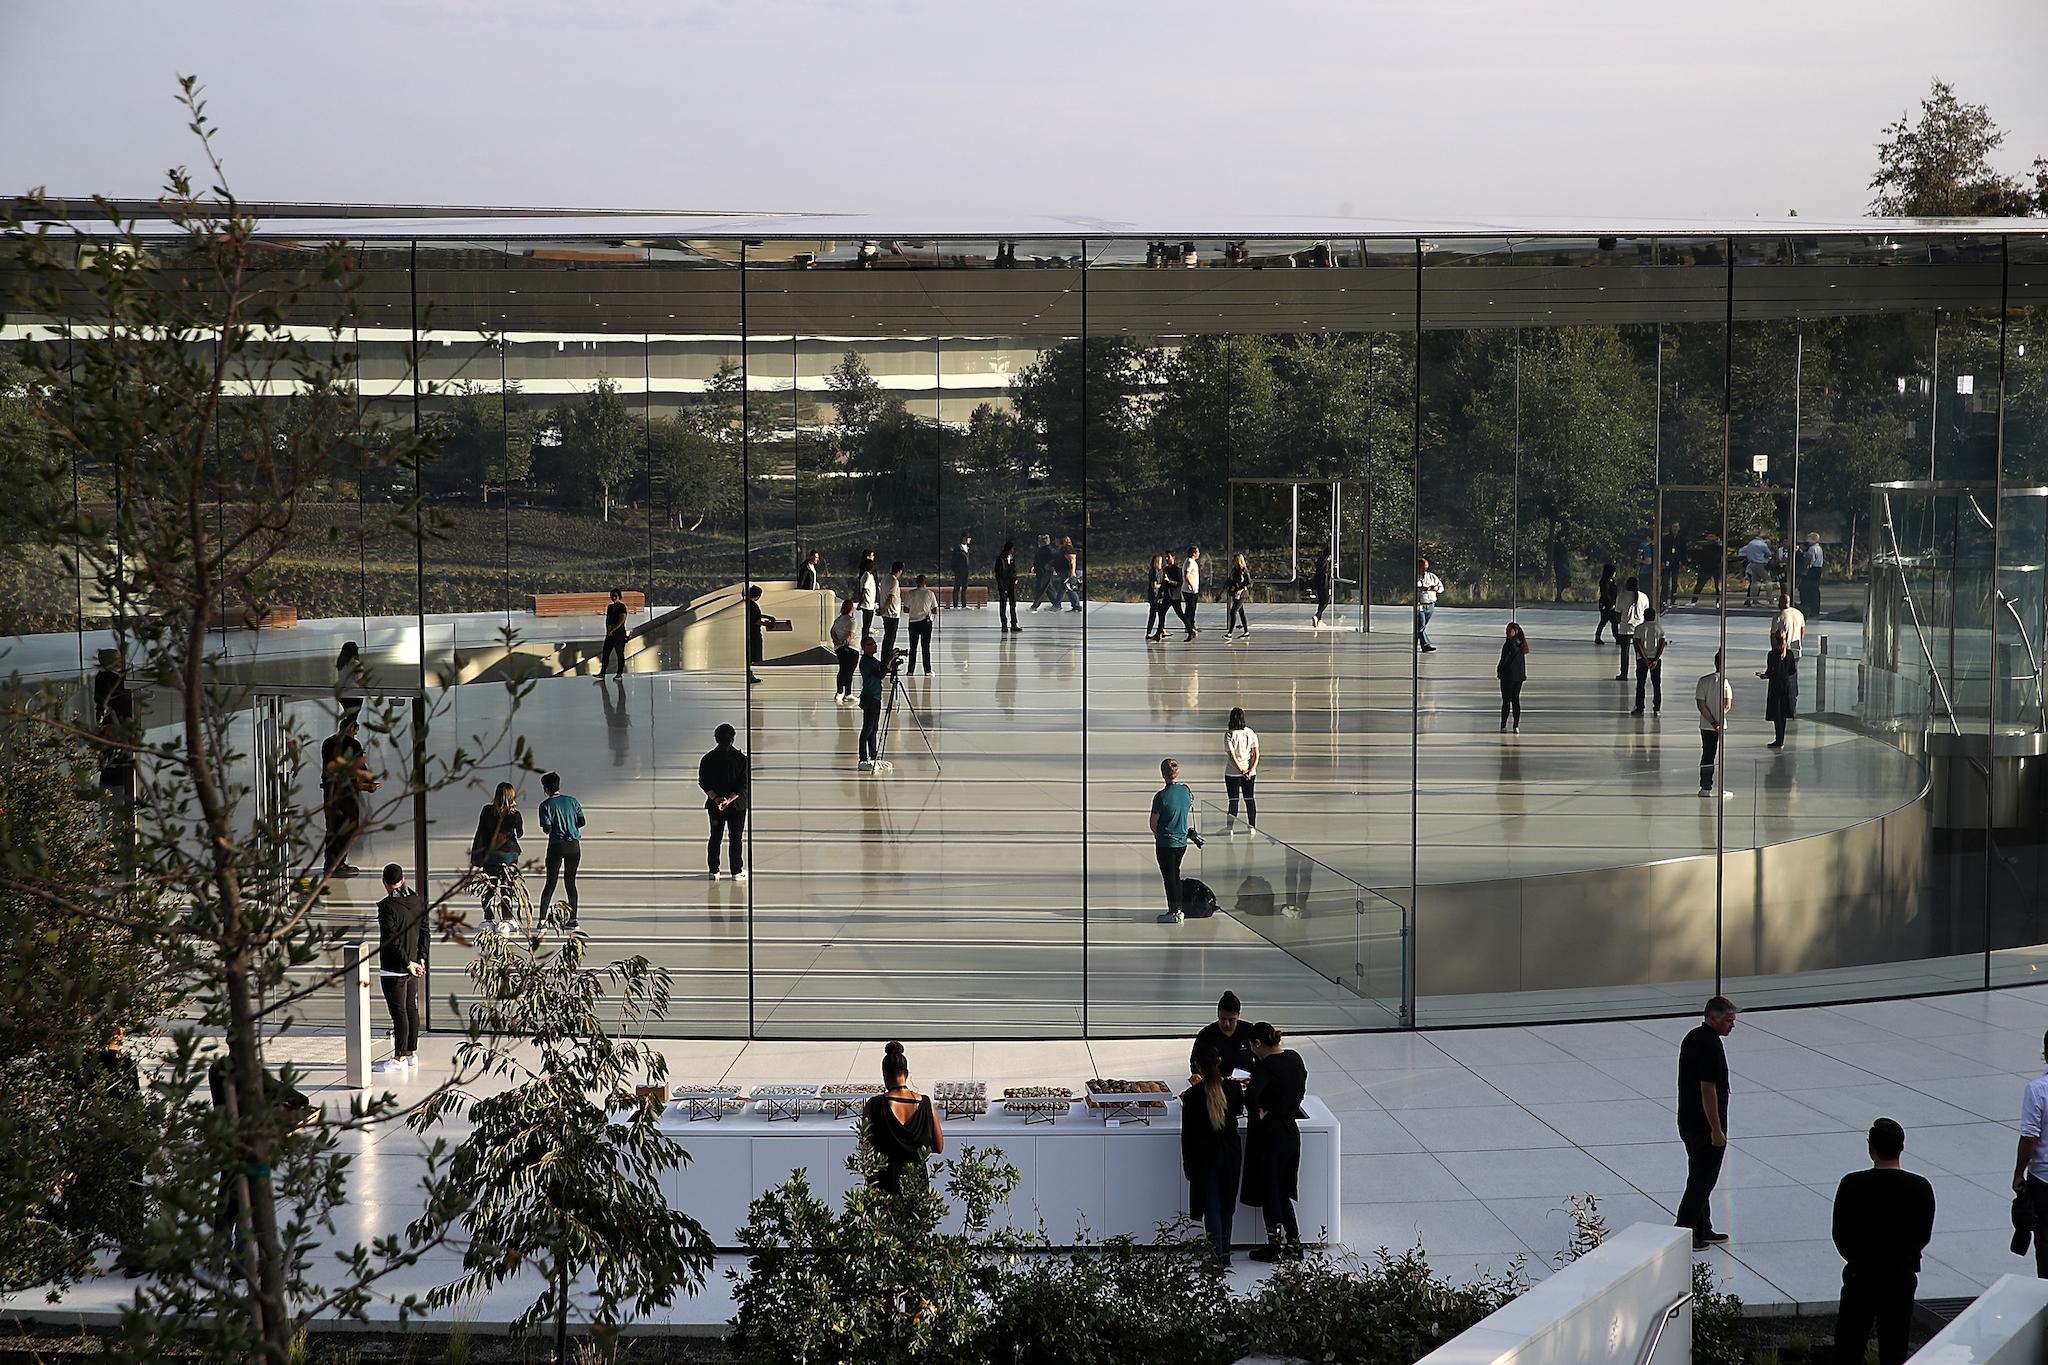 A view of the Steve Jobs Theatre at Apple Park on September 12, 2017 in Cupertino, California